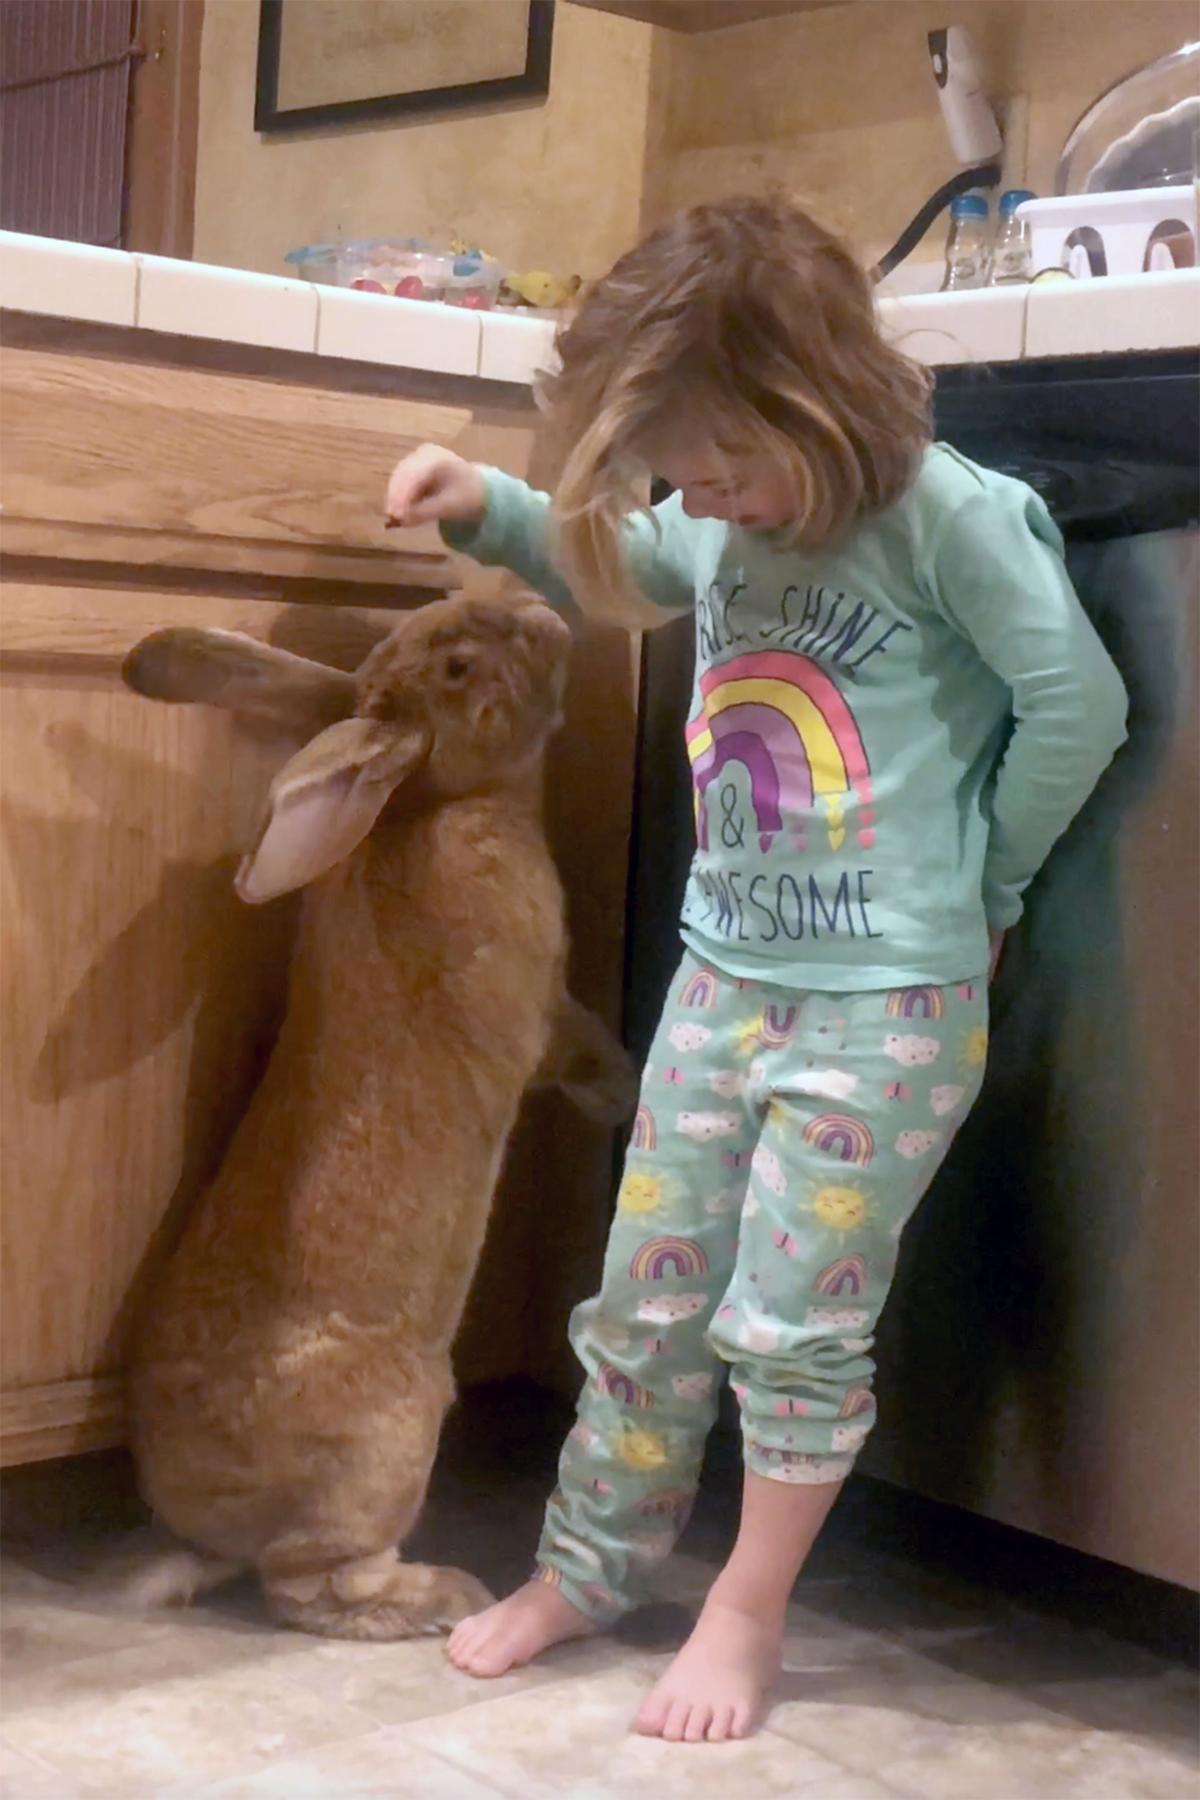 Cocoa Puff the rabbit plays with best friend Macy. (Caters News)